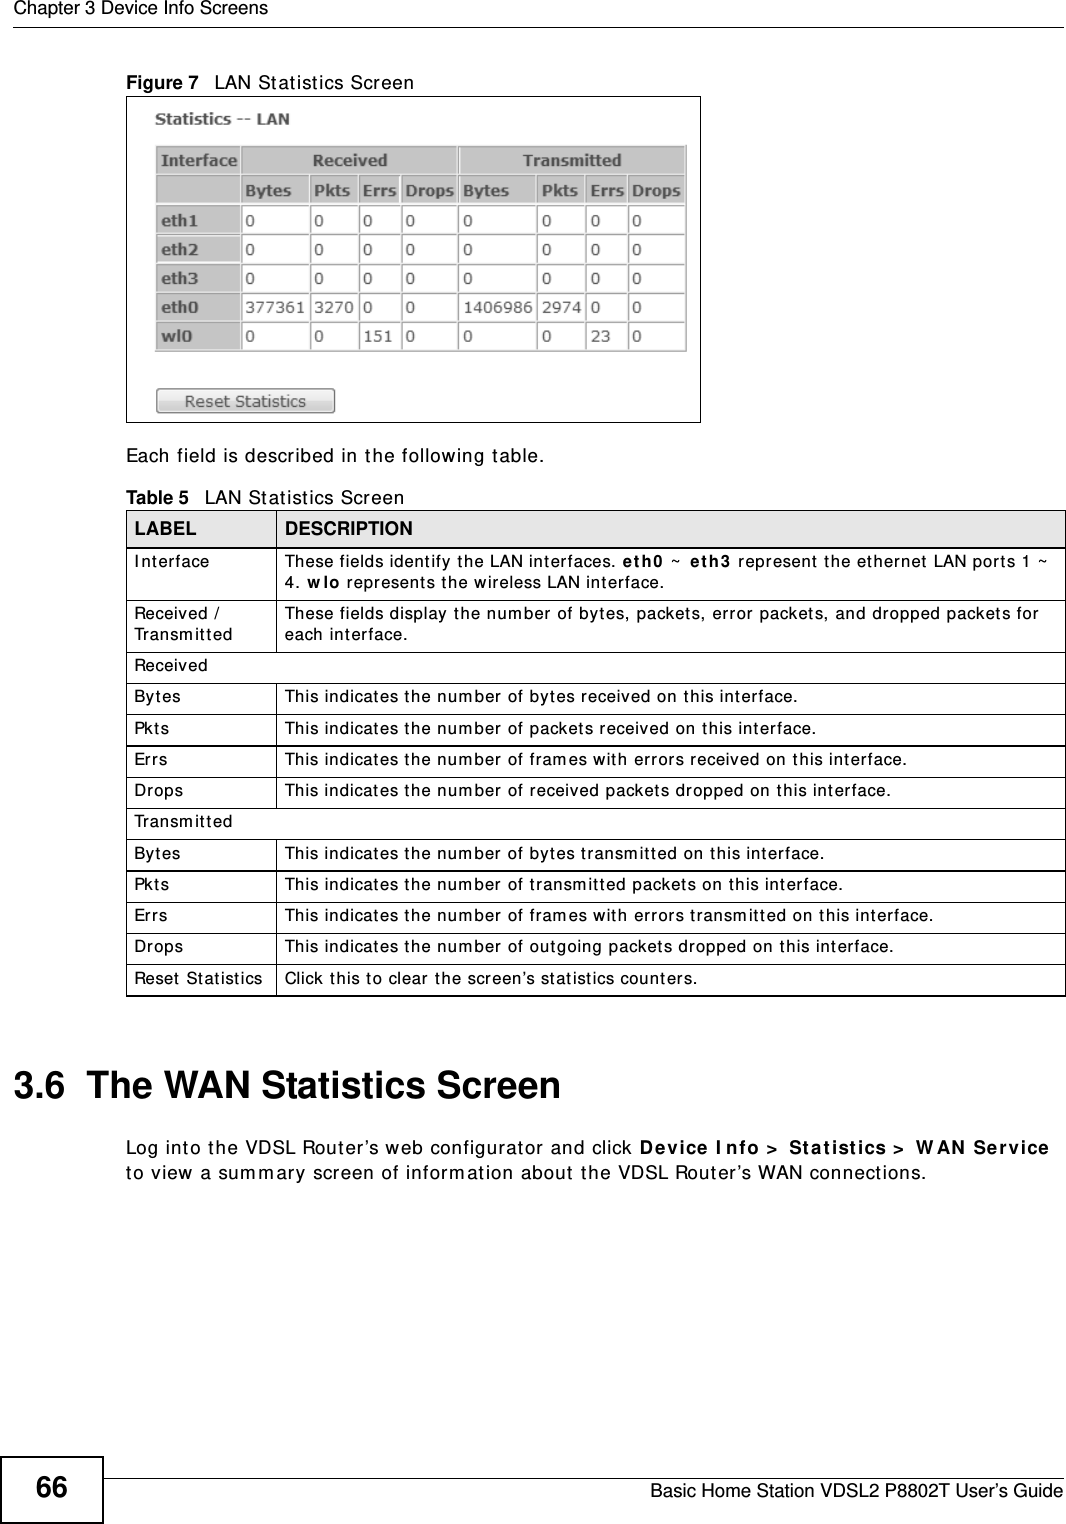 Chapter 3 Device Info ScreensBasic Home Station VDSL2 P8802T User’s Guide66Figure 7   LAN St at istics ScreenEach field is described in the following table.3.6  The WAN Statistics ScreenLog int o the VDSL Router’s web configurat or and click Device I nfo &gt;  St a t ist ics &gt;  W AN  Se rv ice to view a sum m ary screen of inform at ion about  the VDSL Router’s WAN connections.Table 5   LAN St atist ics ScreenLABEL DESCRIPTIONI nter face  These fields identify the LAN int erfaces. e t h0  ~  eth 3  represent the ethernet LAN ports 1 ~  4. w lo represent s t he wireless LAN interface.Received /  Tr a n s m i t t e dThese fields display t he num ber of bytes, packet s, error  packets, and dropped packet s for each inter face.ReceivedBy tes This indicat es the num ber of bytes received on this interface.Pkt s This indicates the num ber of packet s received on this int erface.Errs This indicates the num ber of fram es wit h errors received on this interface.Drops This indicates t he num ber  of received packet s dropped on this inter face.Tr a n s m i t t e dByt es This indicates t he num ber of byt es t ransm it ted on t his int erface.Pkt s This indicat es t he num ber of transm itted packets on this int erface.Errs This indicates the num ber of fram es wit h errors transm it ted on this int er face.Drops This indicates the num ber of outgoing packet s dropped on this int erface.Reset  Statistics Click this to clear t he screen’s statist ics counter s.